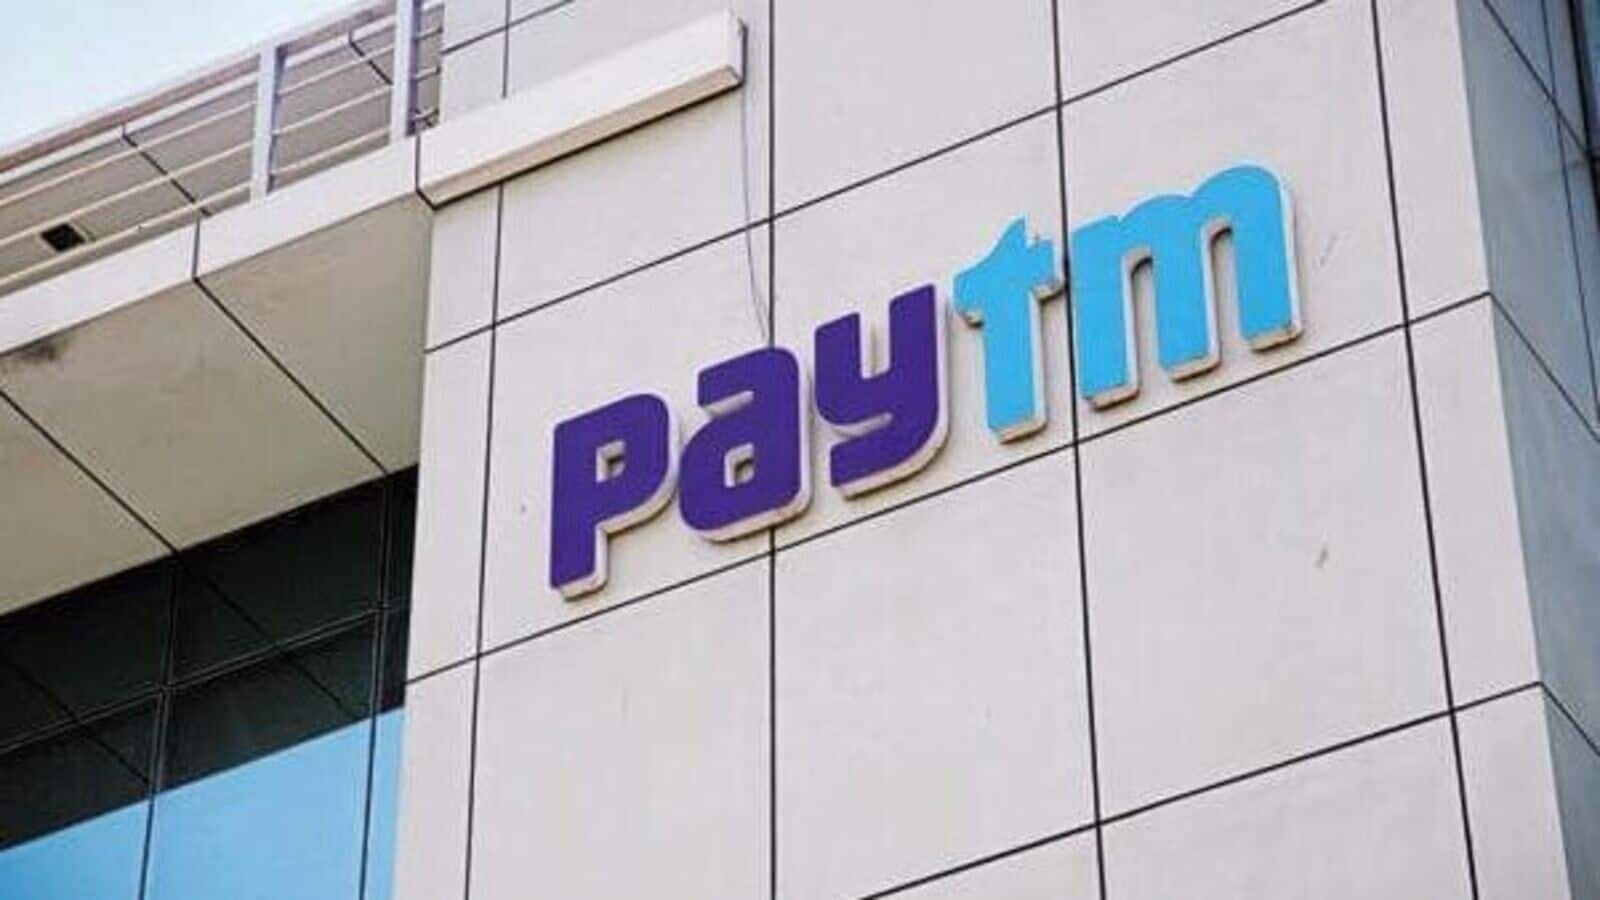 ₹35 for healthcare? Paytm launches affordable health plan for merchants